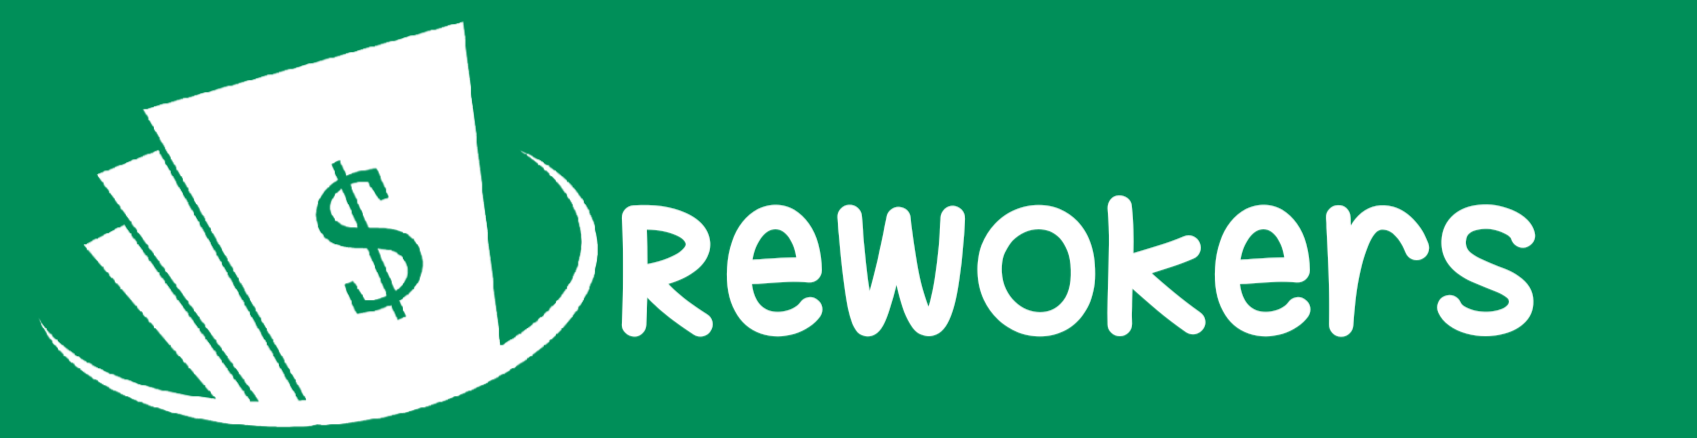 https://www.hrservices.com.pk/company/rewokers